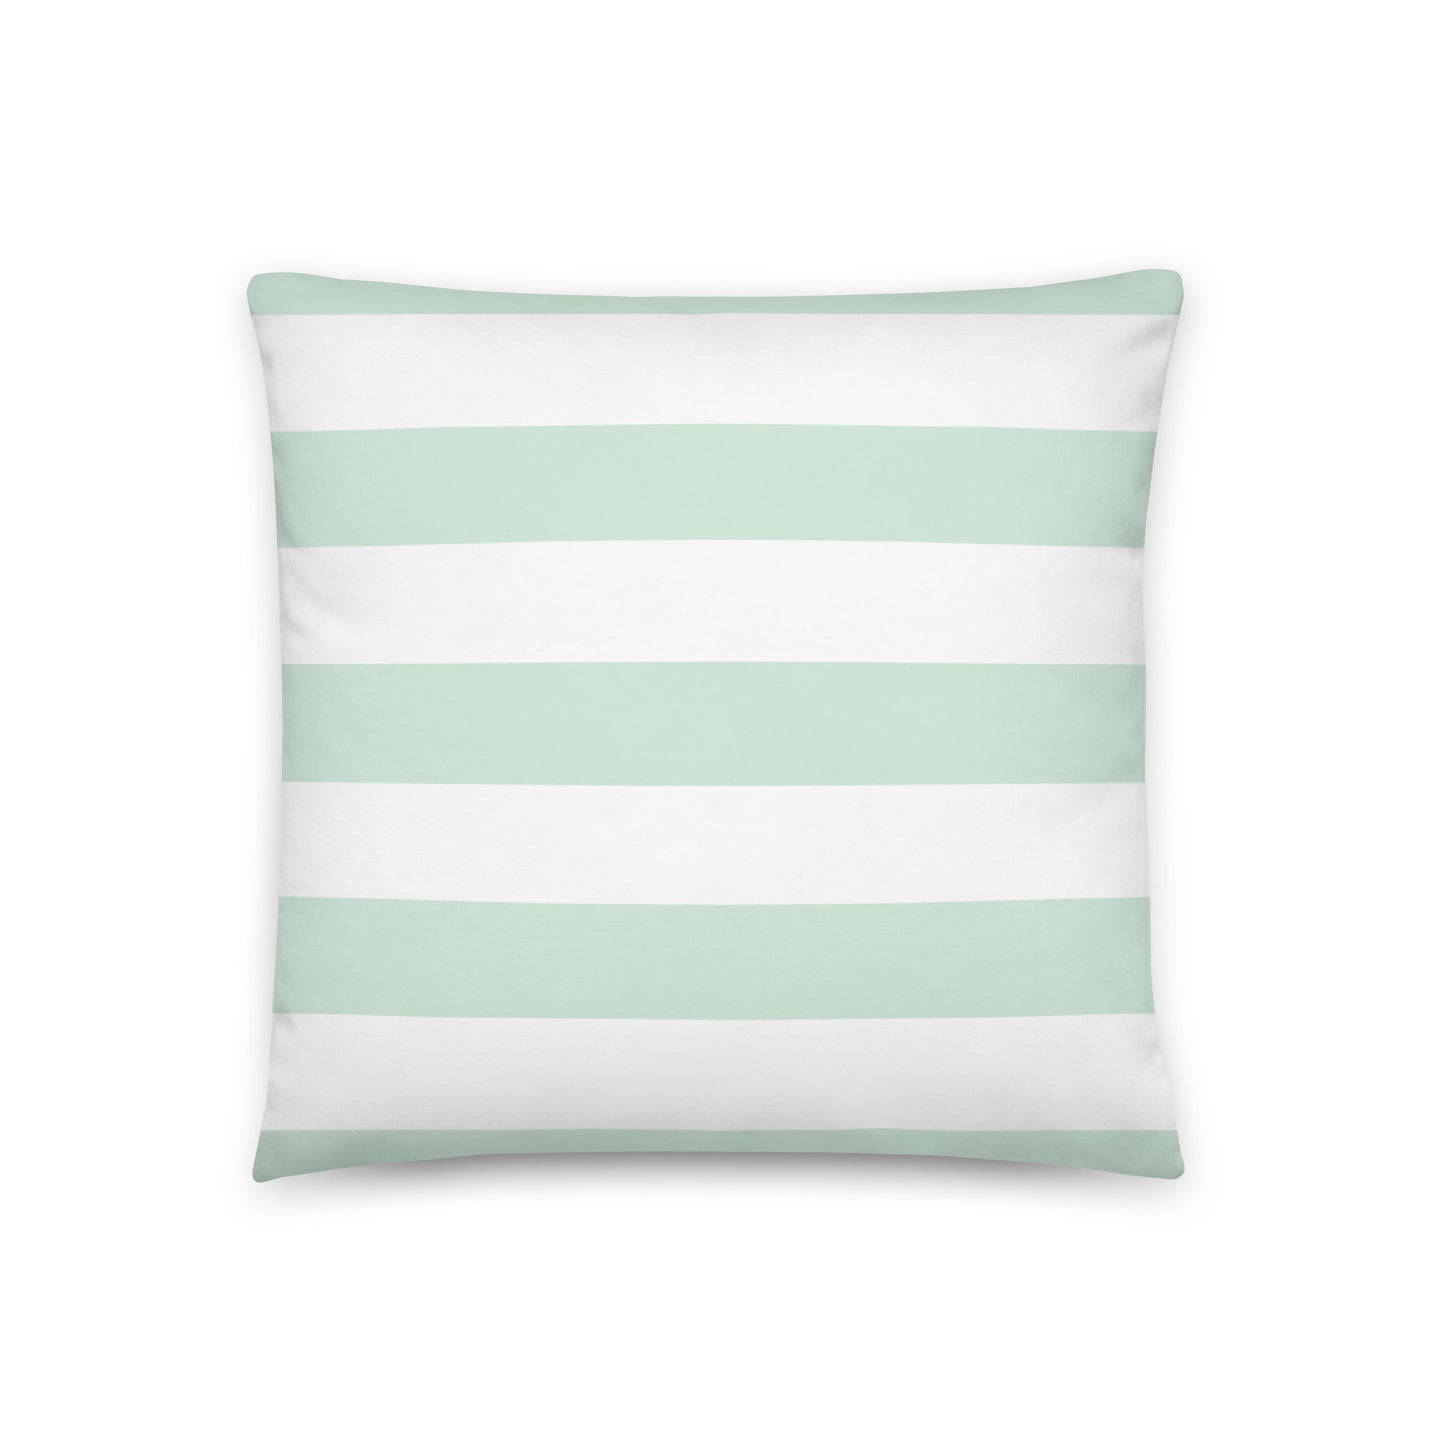 Sailor Mint - Sustainably Made Pillows